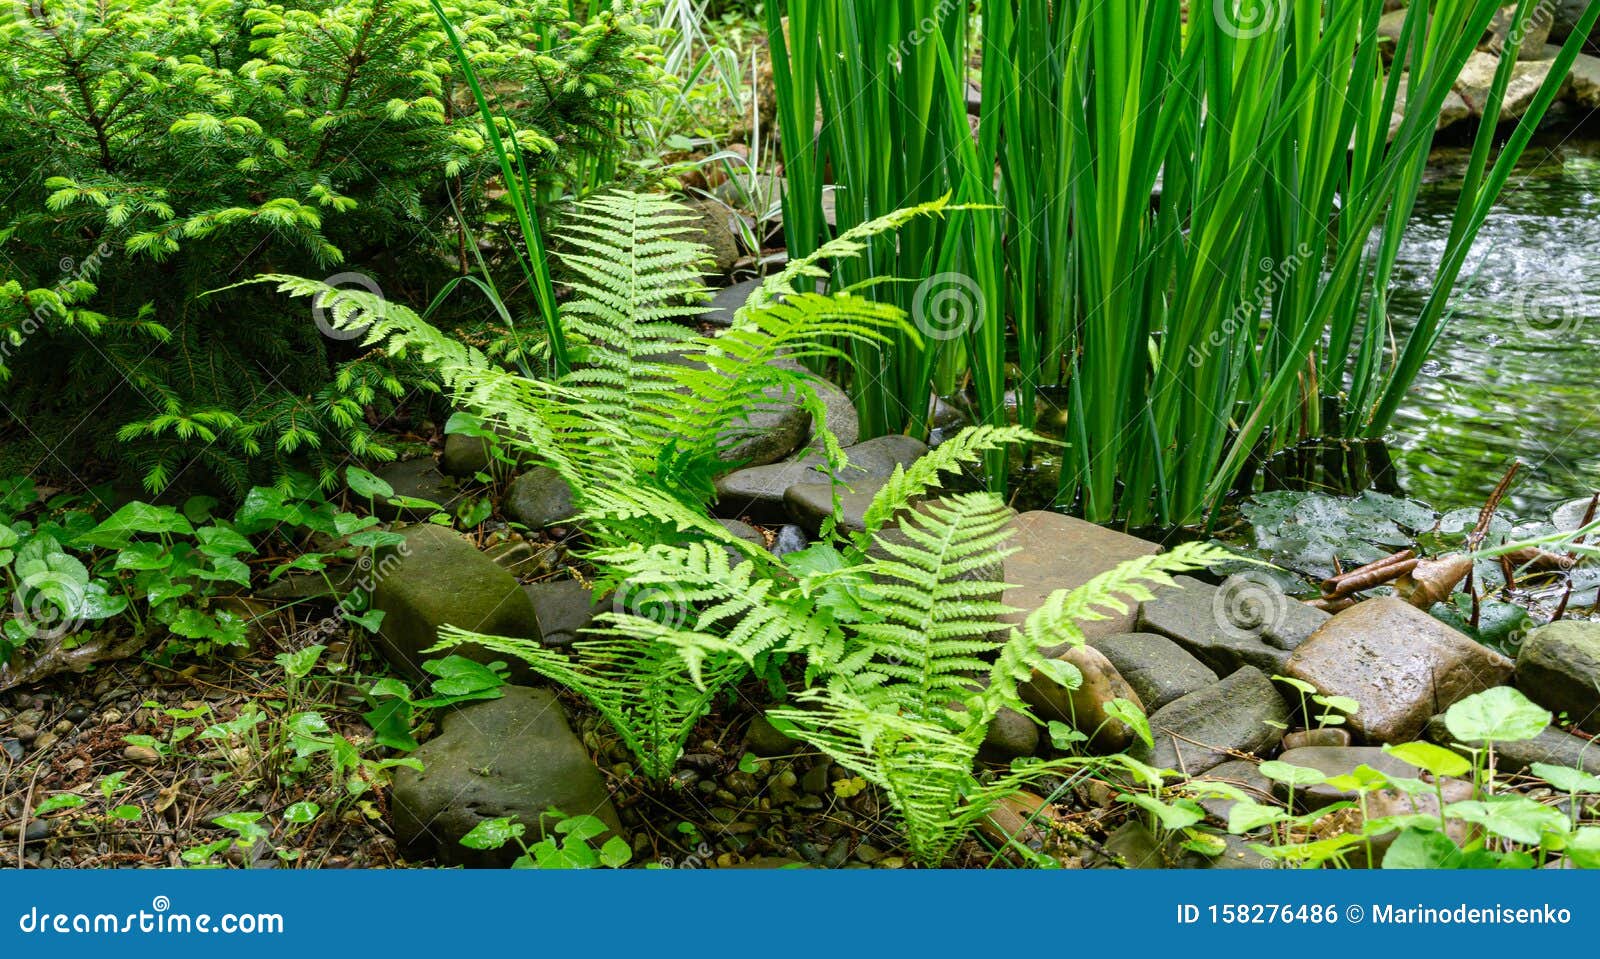 Young Bright Green Sprouts Of Matteuccia Struthiopteris Ostrich Fern Fiddlehead Fern Or Shuttlecock Fern Against Small Garden P Stock Photo Image Of Mystery Close 158276486